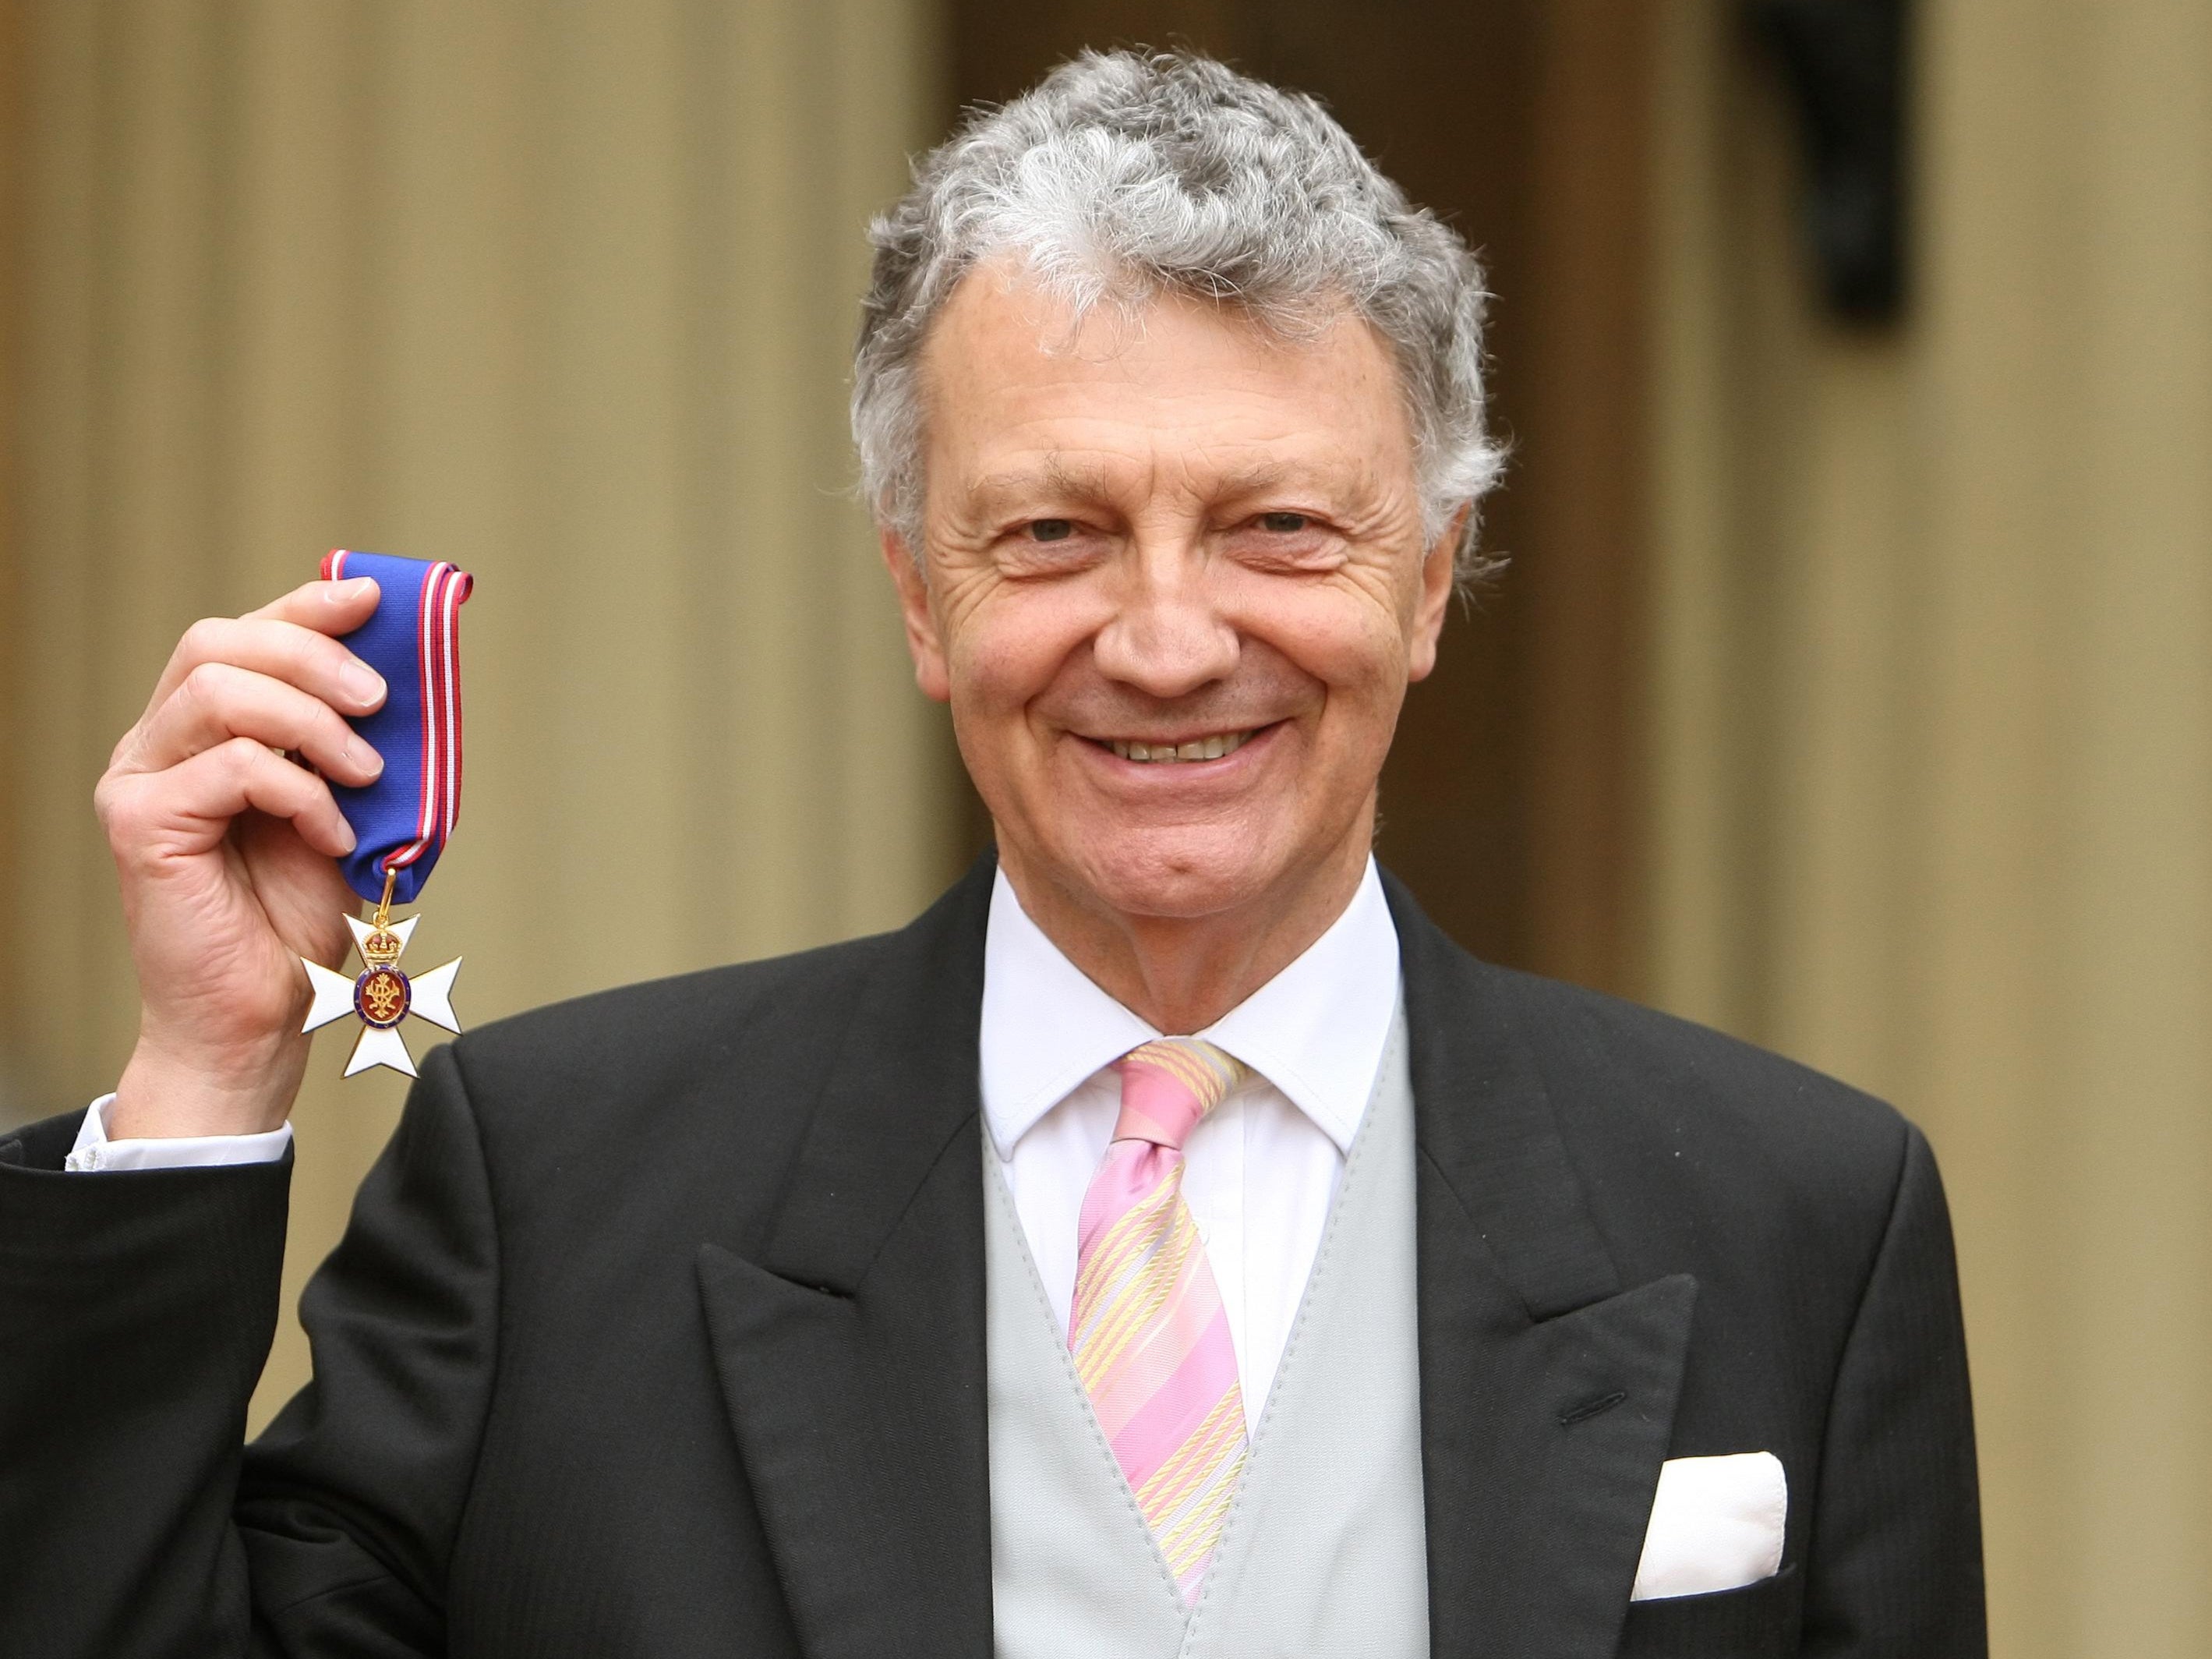 William Shawcross with his Commander of the Royal Victorian Order (RVO) medal, during an investiture ceremony at Buckingham Palace on 10 March 2011